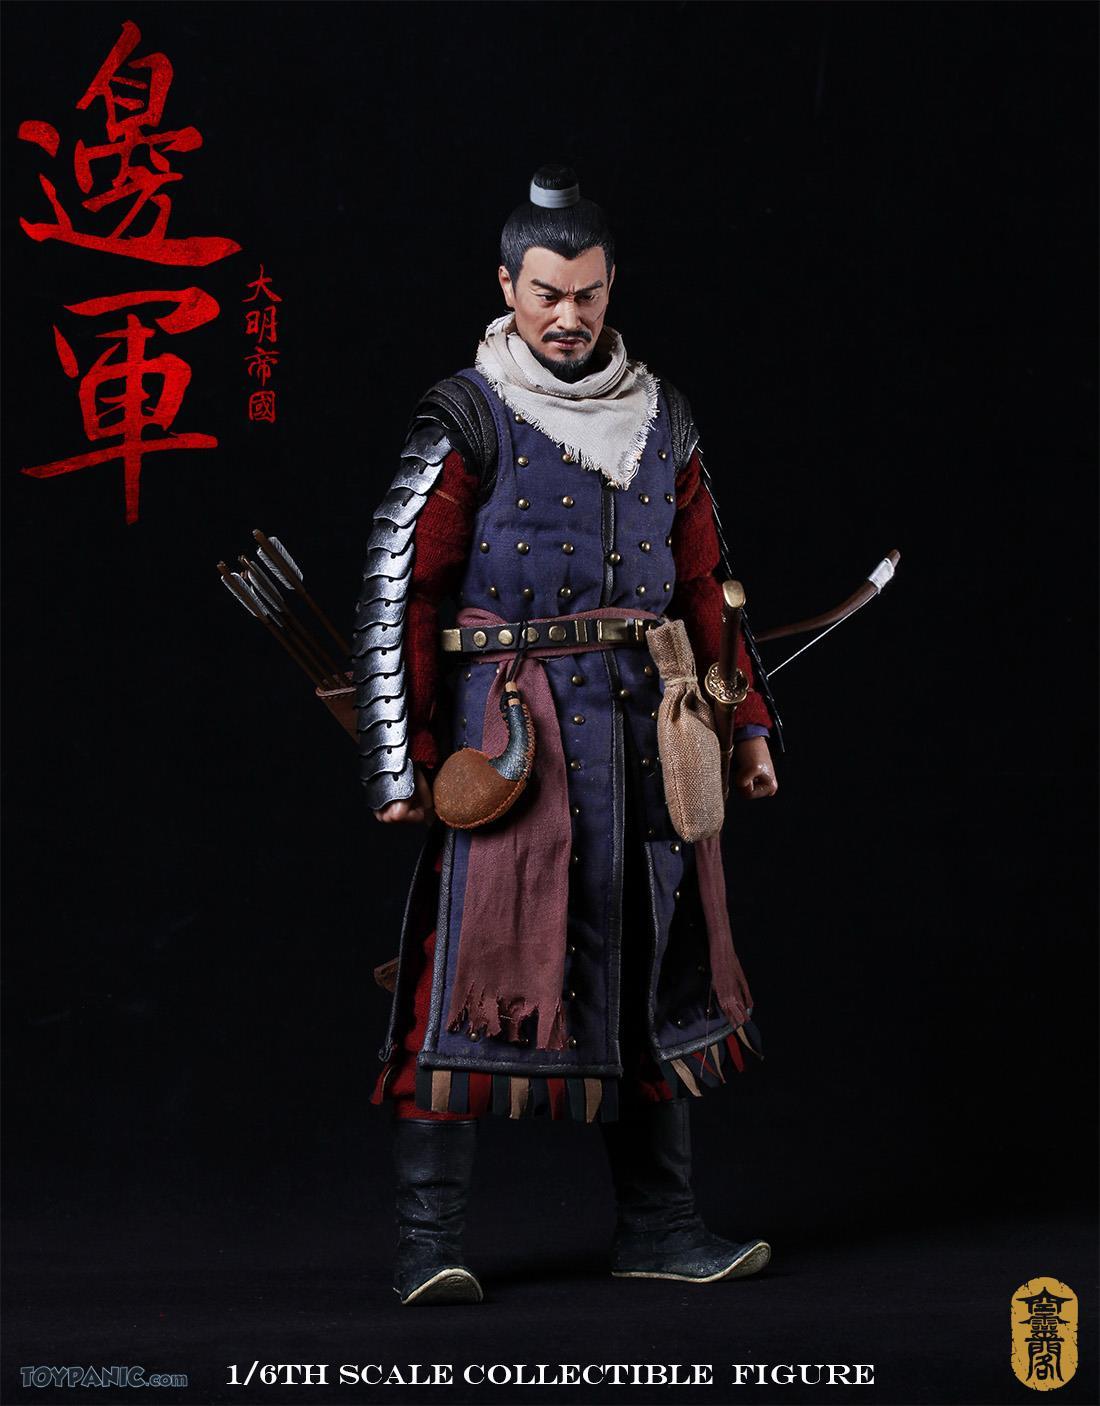 Historical - NEW PRODUCT: Sonder: 1/6 Song Dynasty Series-Yue Jiaxing Yang Zaixing Action Figure (SD005#) 1223201650535PM_35